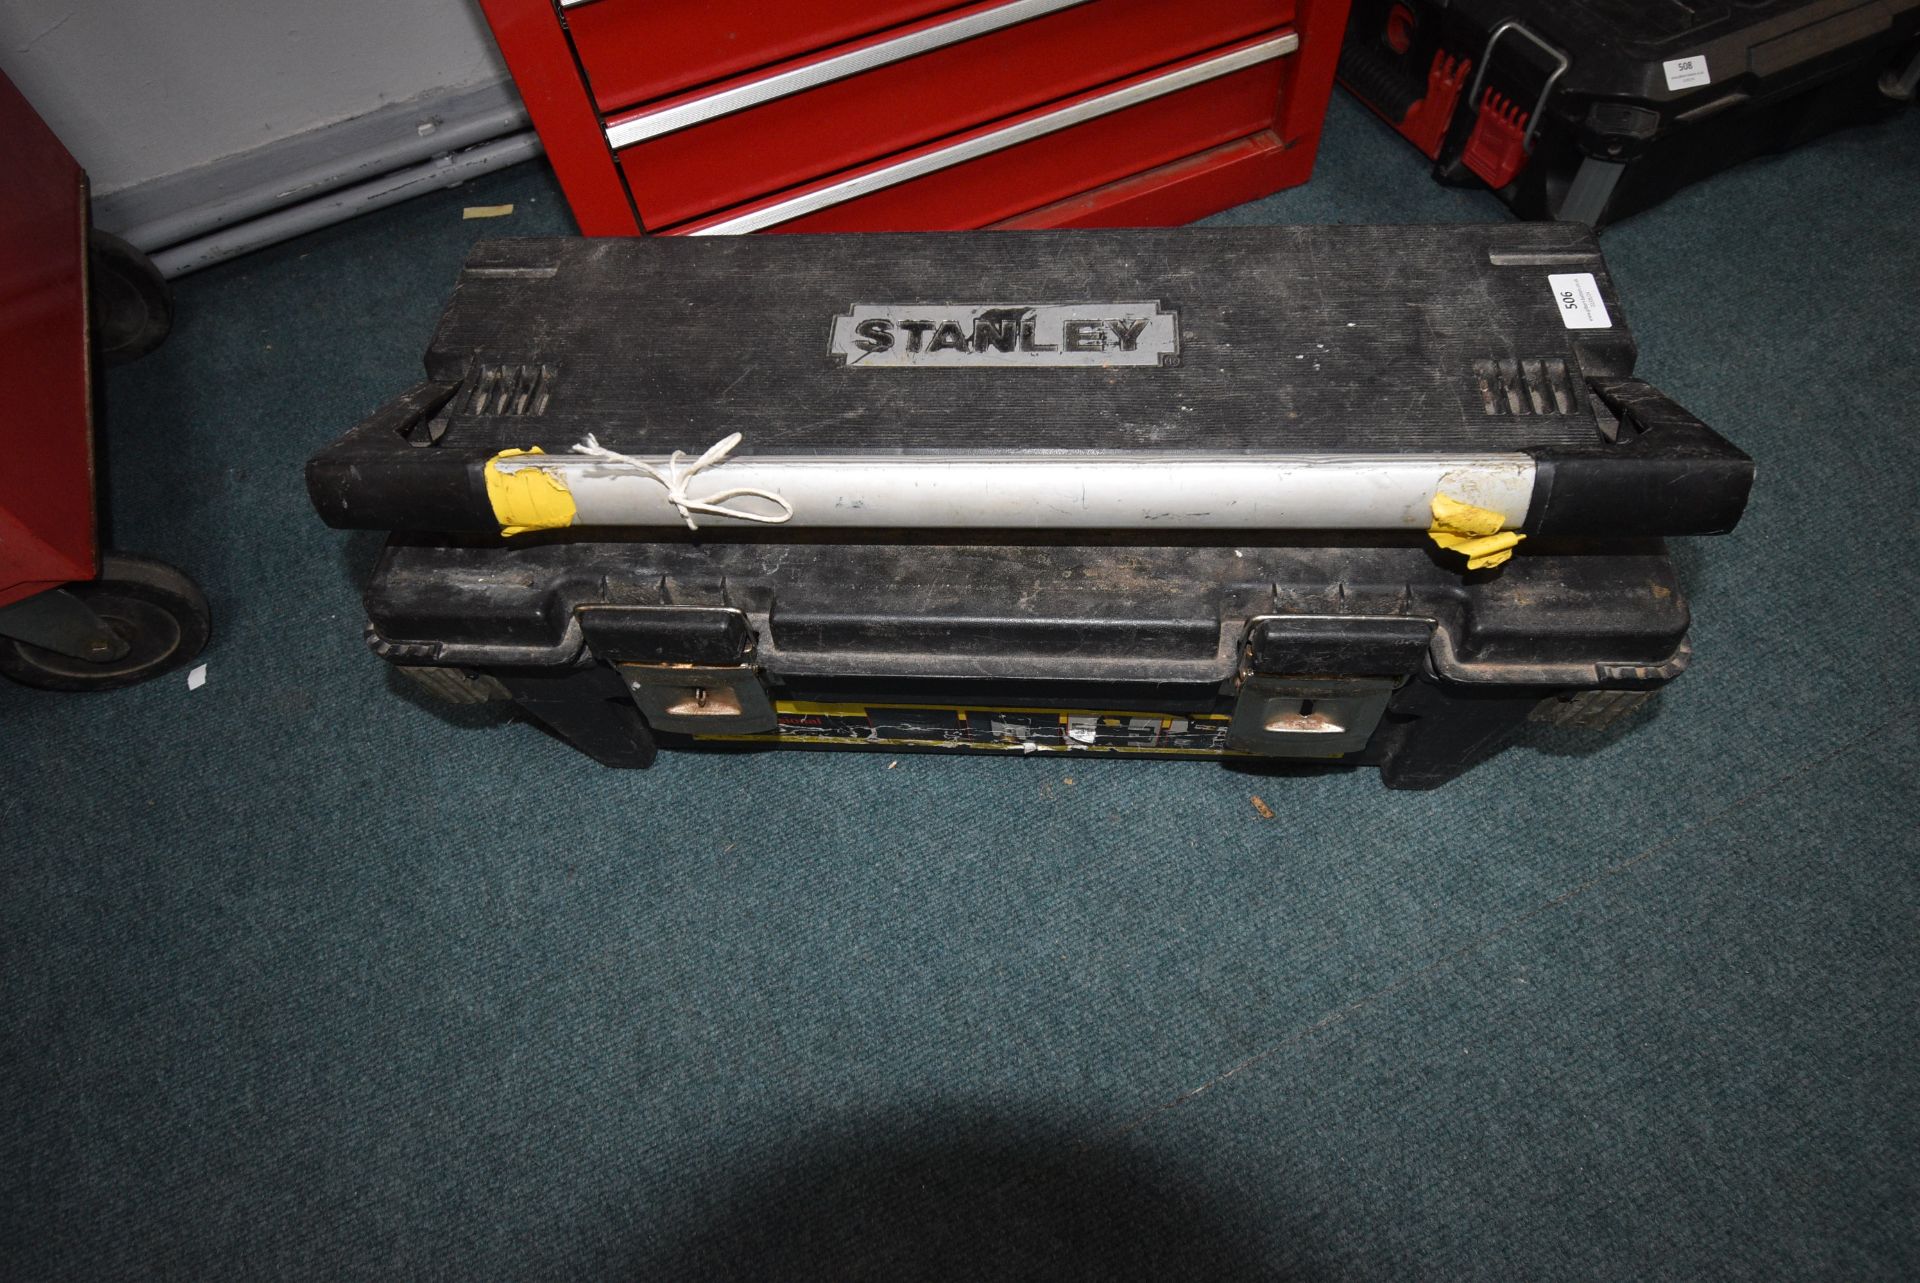 Stanley Toolbox and Contents of Tools